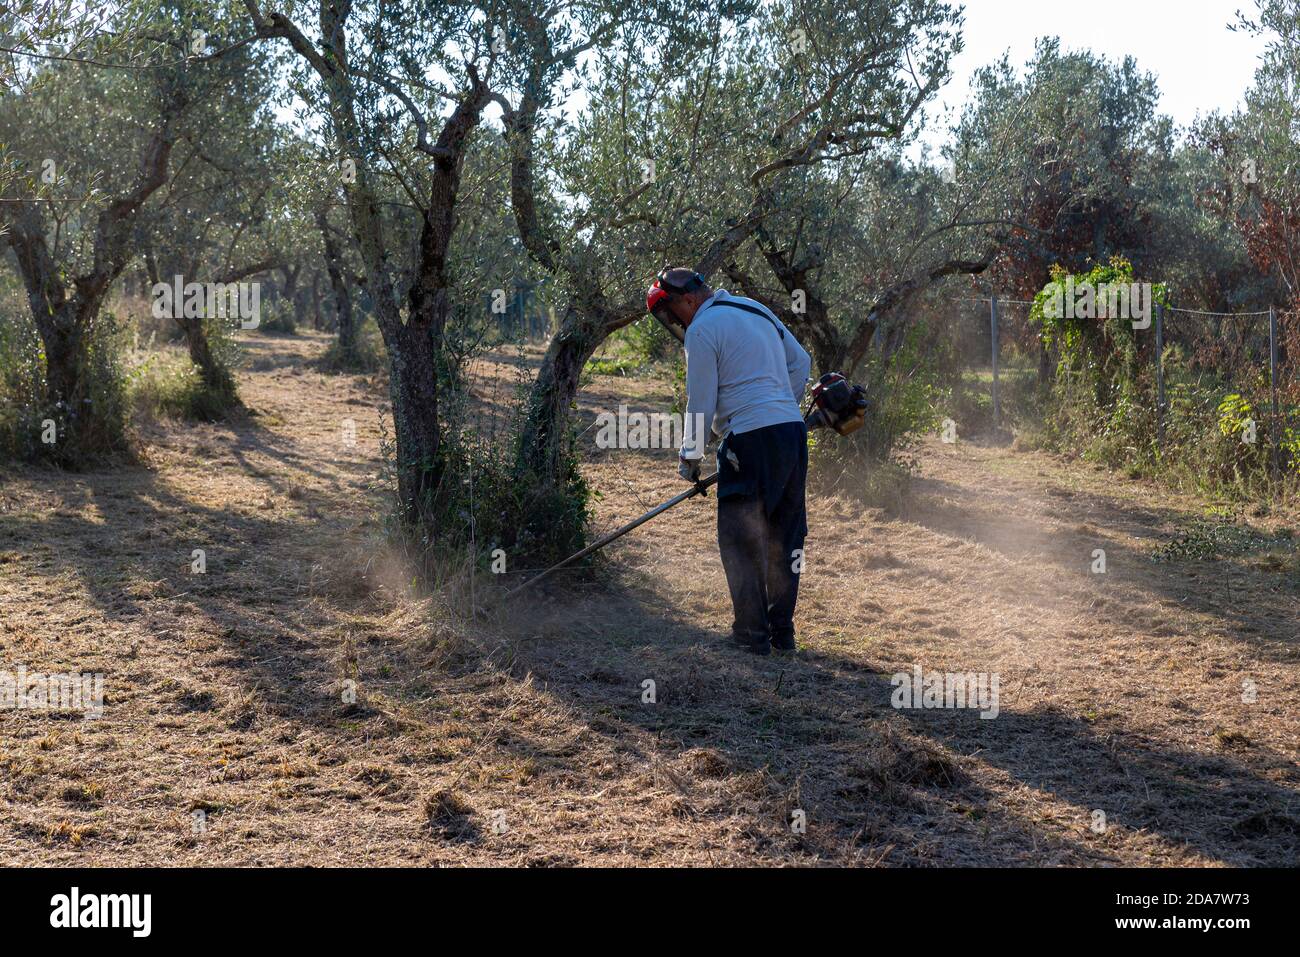 terni,italy september 13 2020:cleaning with brush cutter during the chopping of olive fields Stock Photo